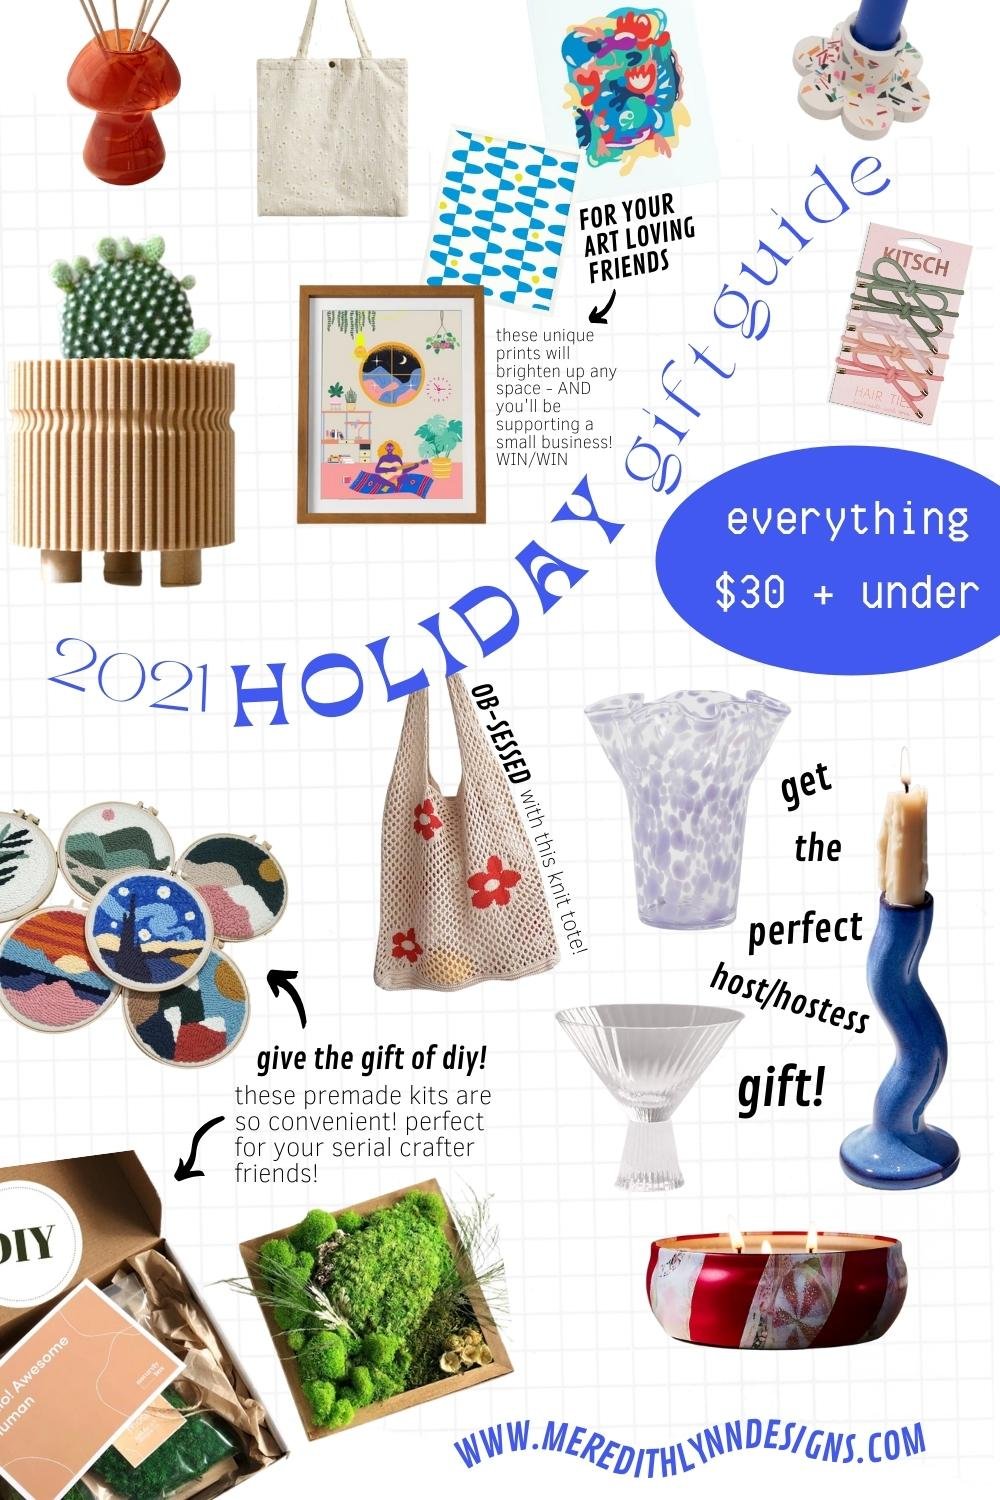 HOLIDAY GIFT GUIDE (Over 20 Unique Gift Ideas- All Under $30